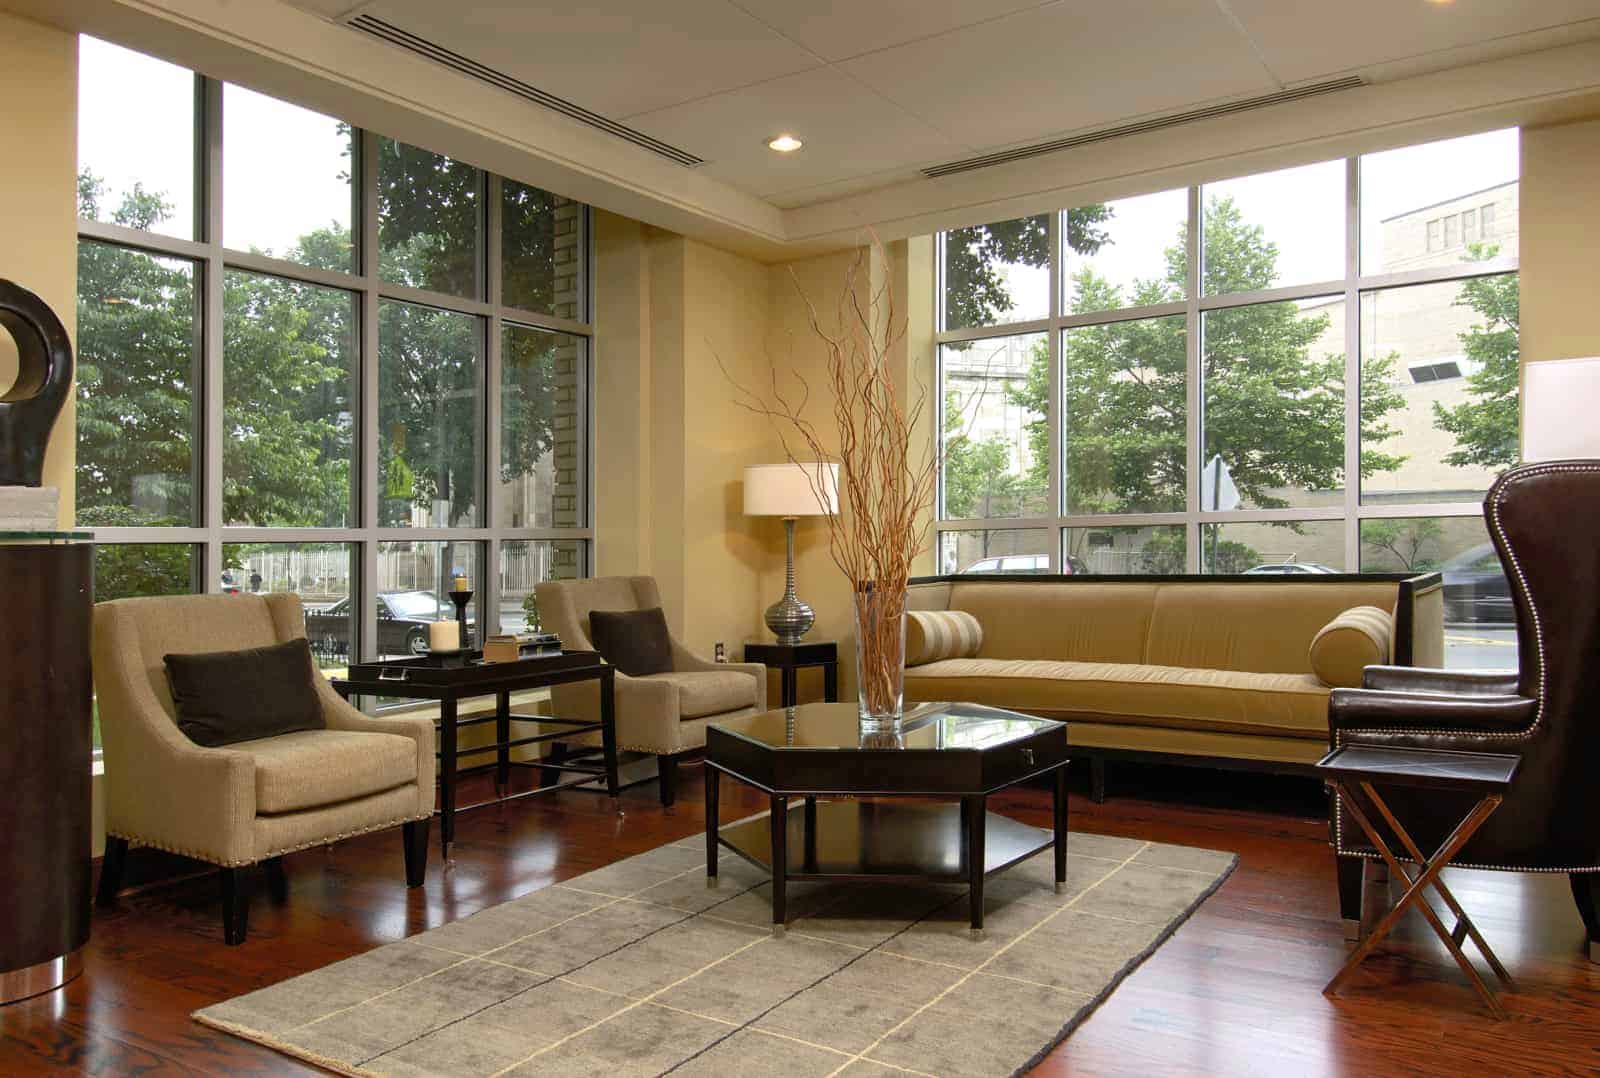 Interior of lobby with couch, chairs, coffee table, side tables, and lamps.